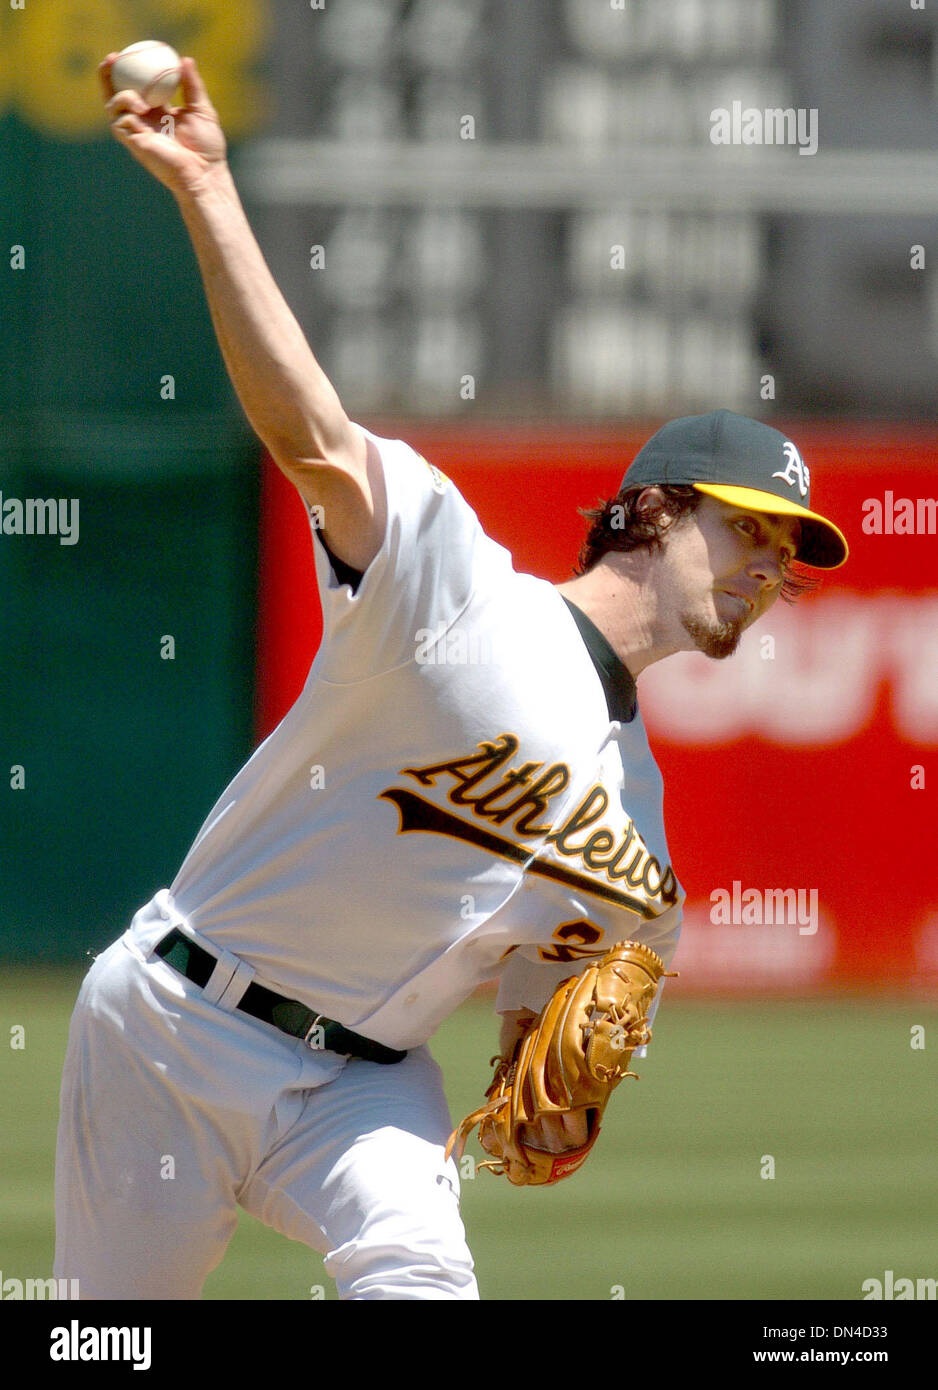 Jul 26, 2006; Oakland, CA, USA; The Oakland Athletics' DAN HAREN pitched a strong game against the Boston Red Sox. The A's defeated the Red Sox 5-1 at McAfee Coliseum in Oakland, California, on Wednesday, July 26, 2006. Mandatory Credit: Photo by Dan Honda/Contra Costa Times/ZUMA Press. (©) Copyright 2006 by Contra Costa Times Stock Photo